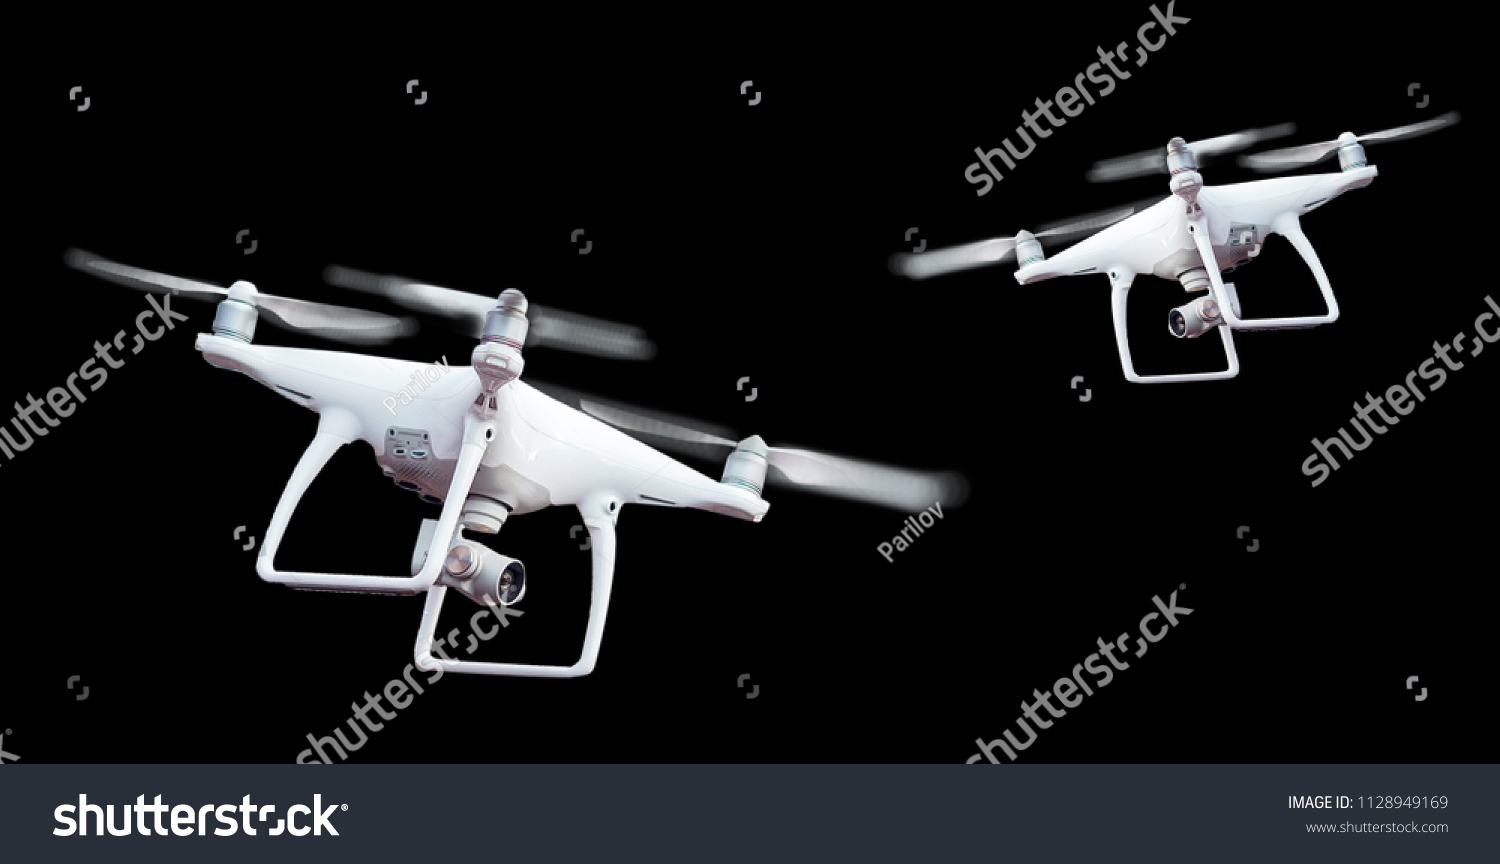 Isolated white drone with twirled propellers on black background #1128949169